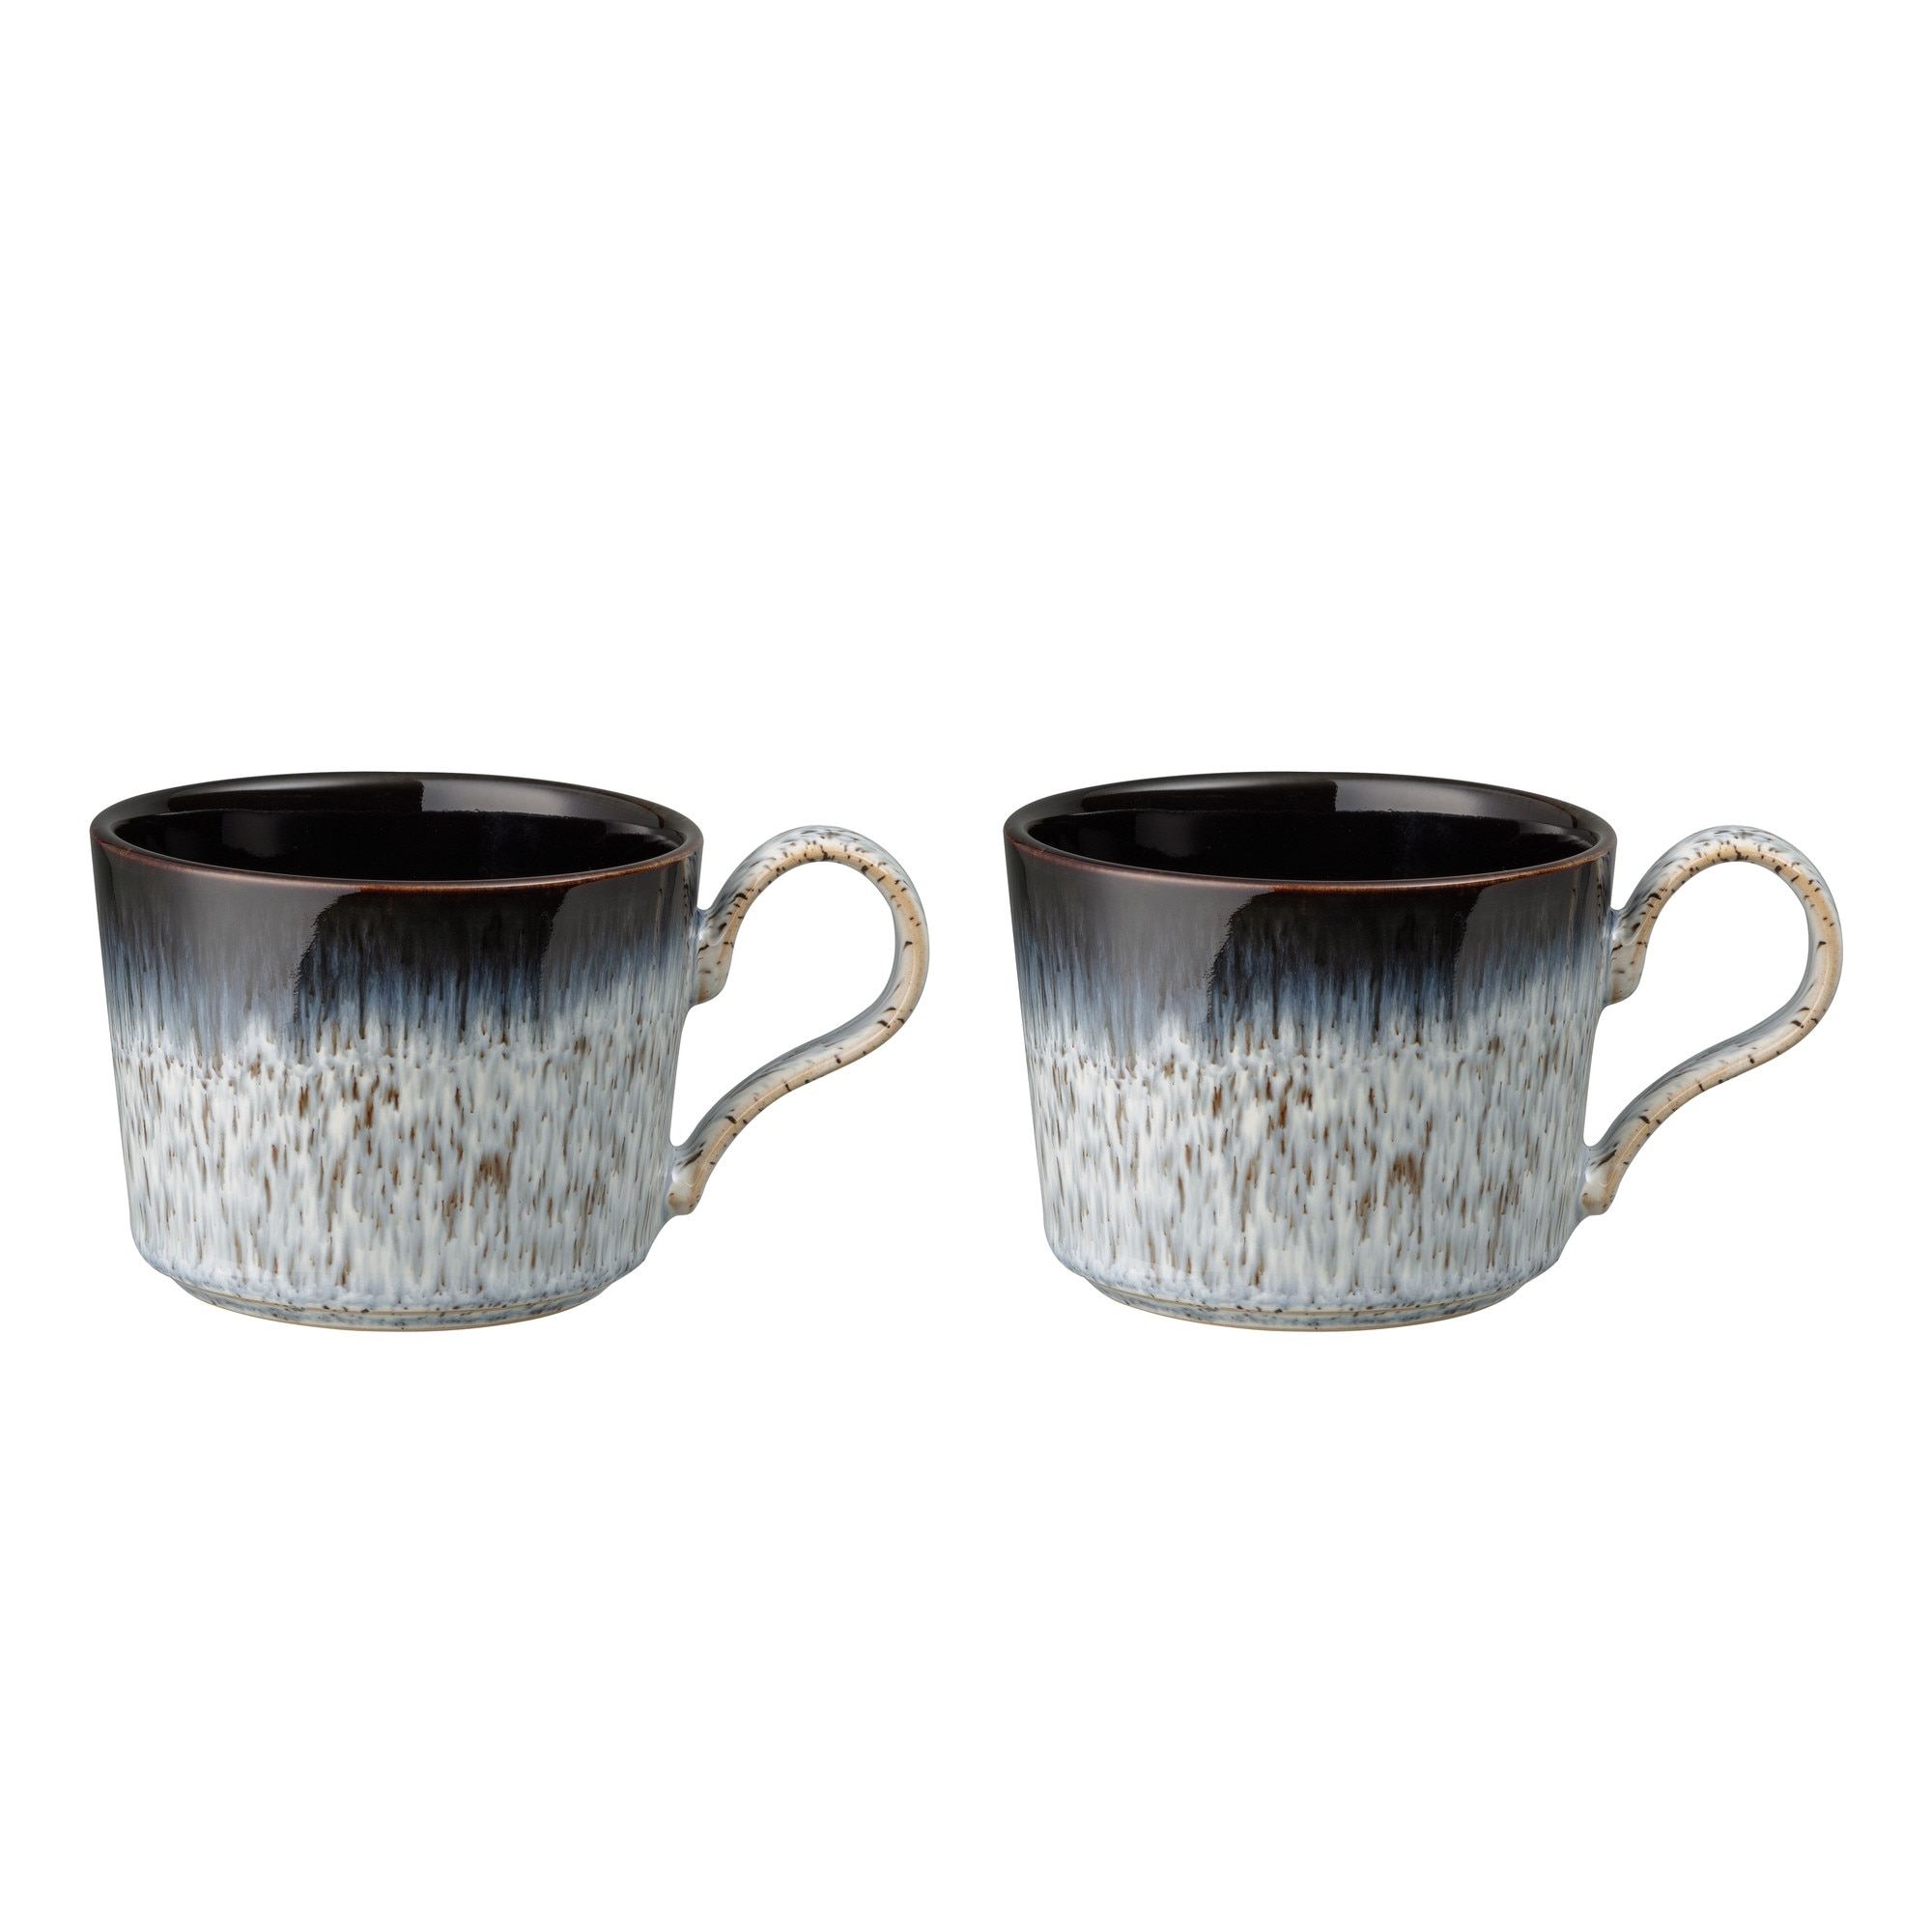 Halo Brew Tea/coffee Cup Set Of 2